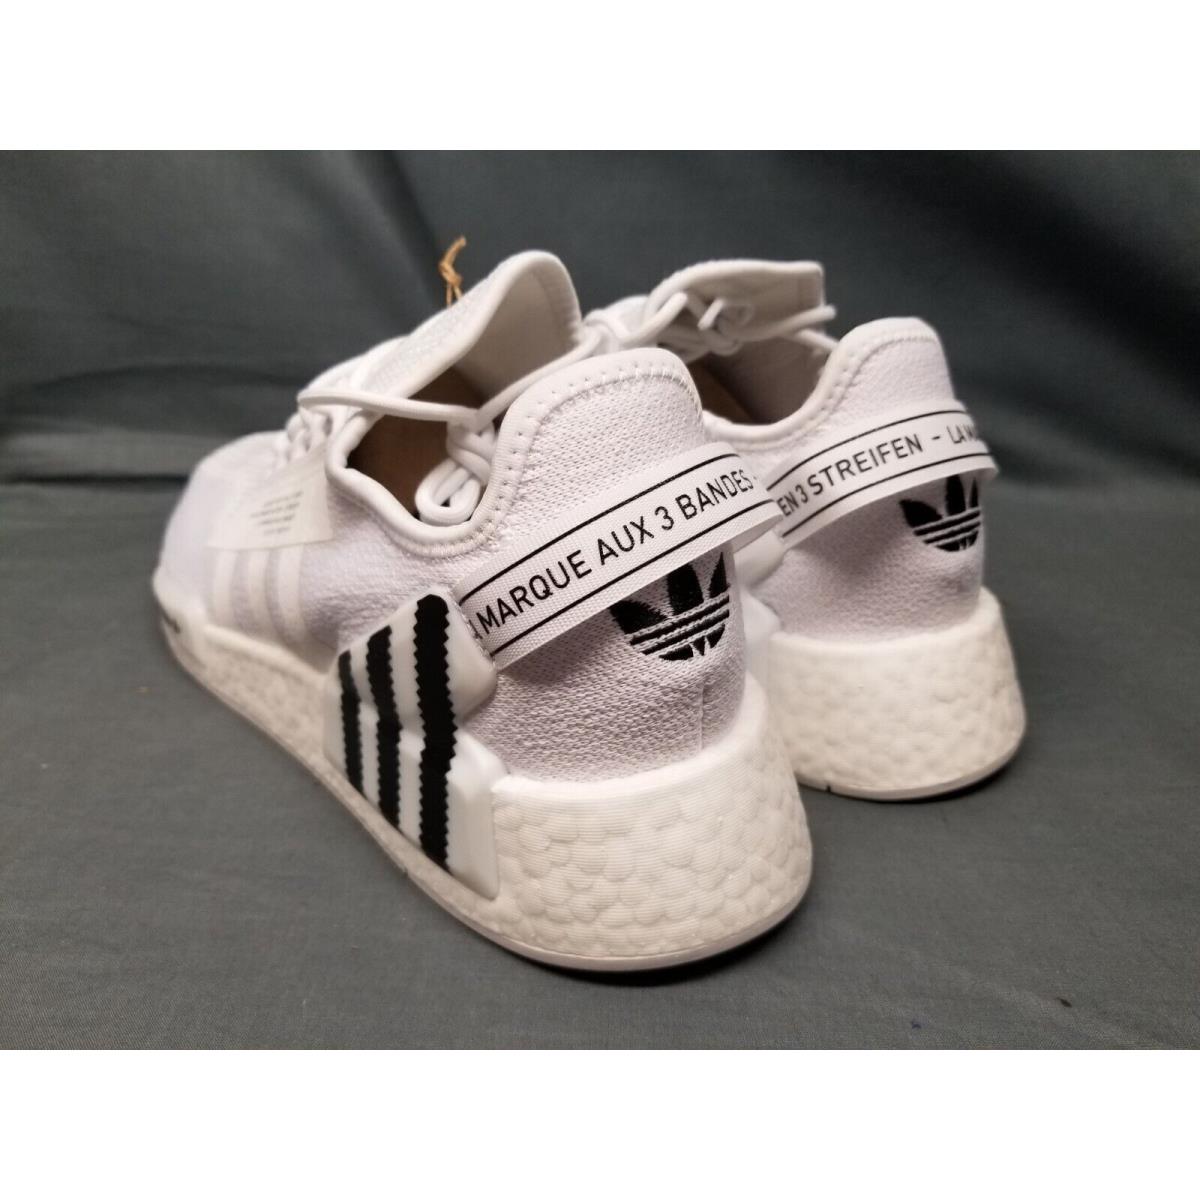 Adidas shoes NMD - White 4